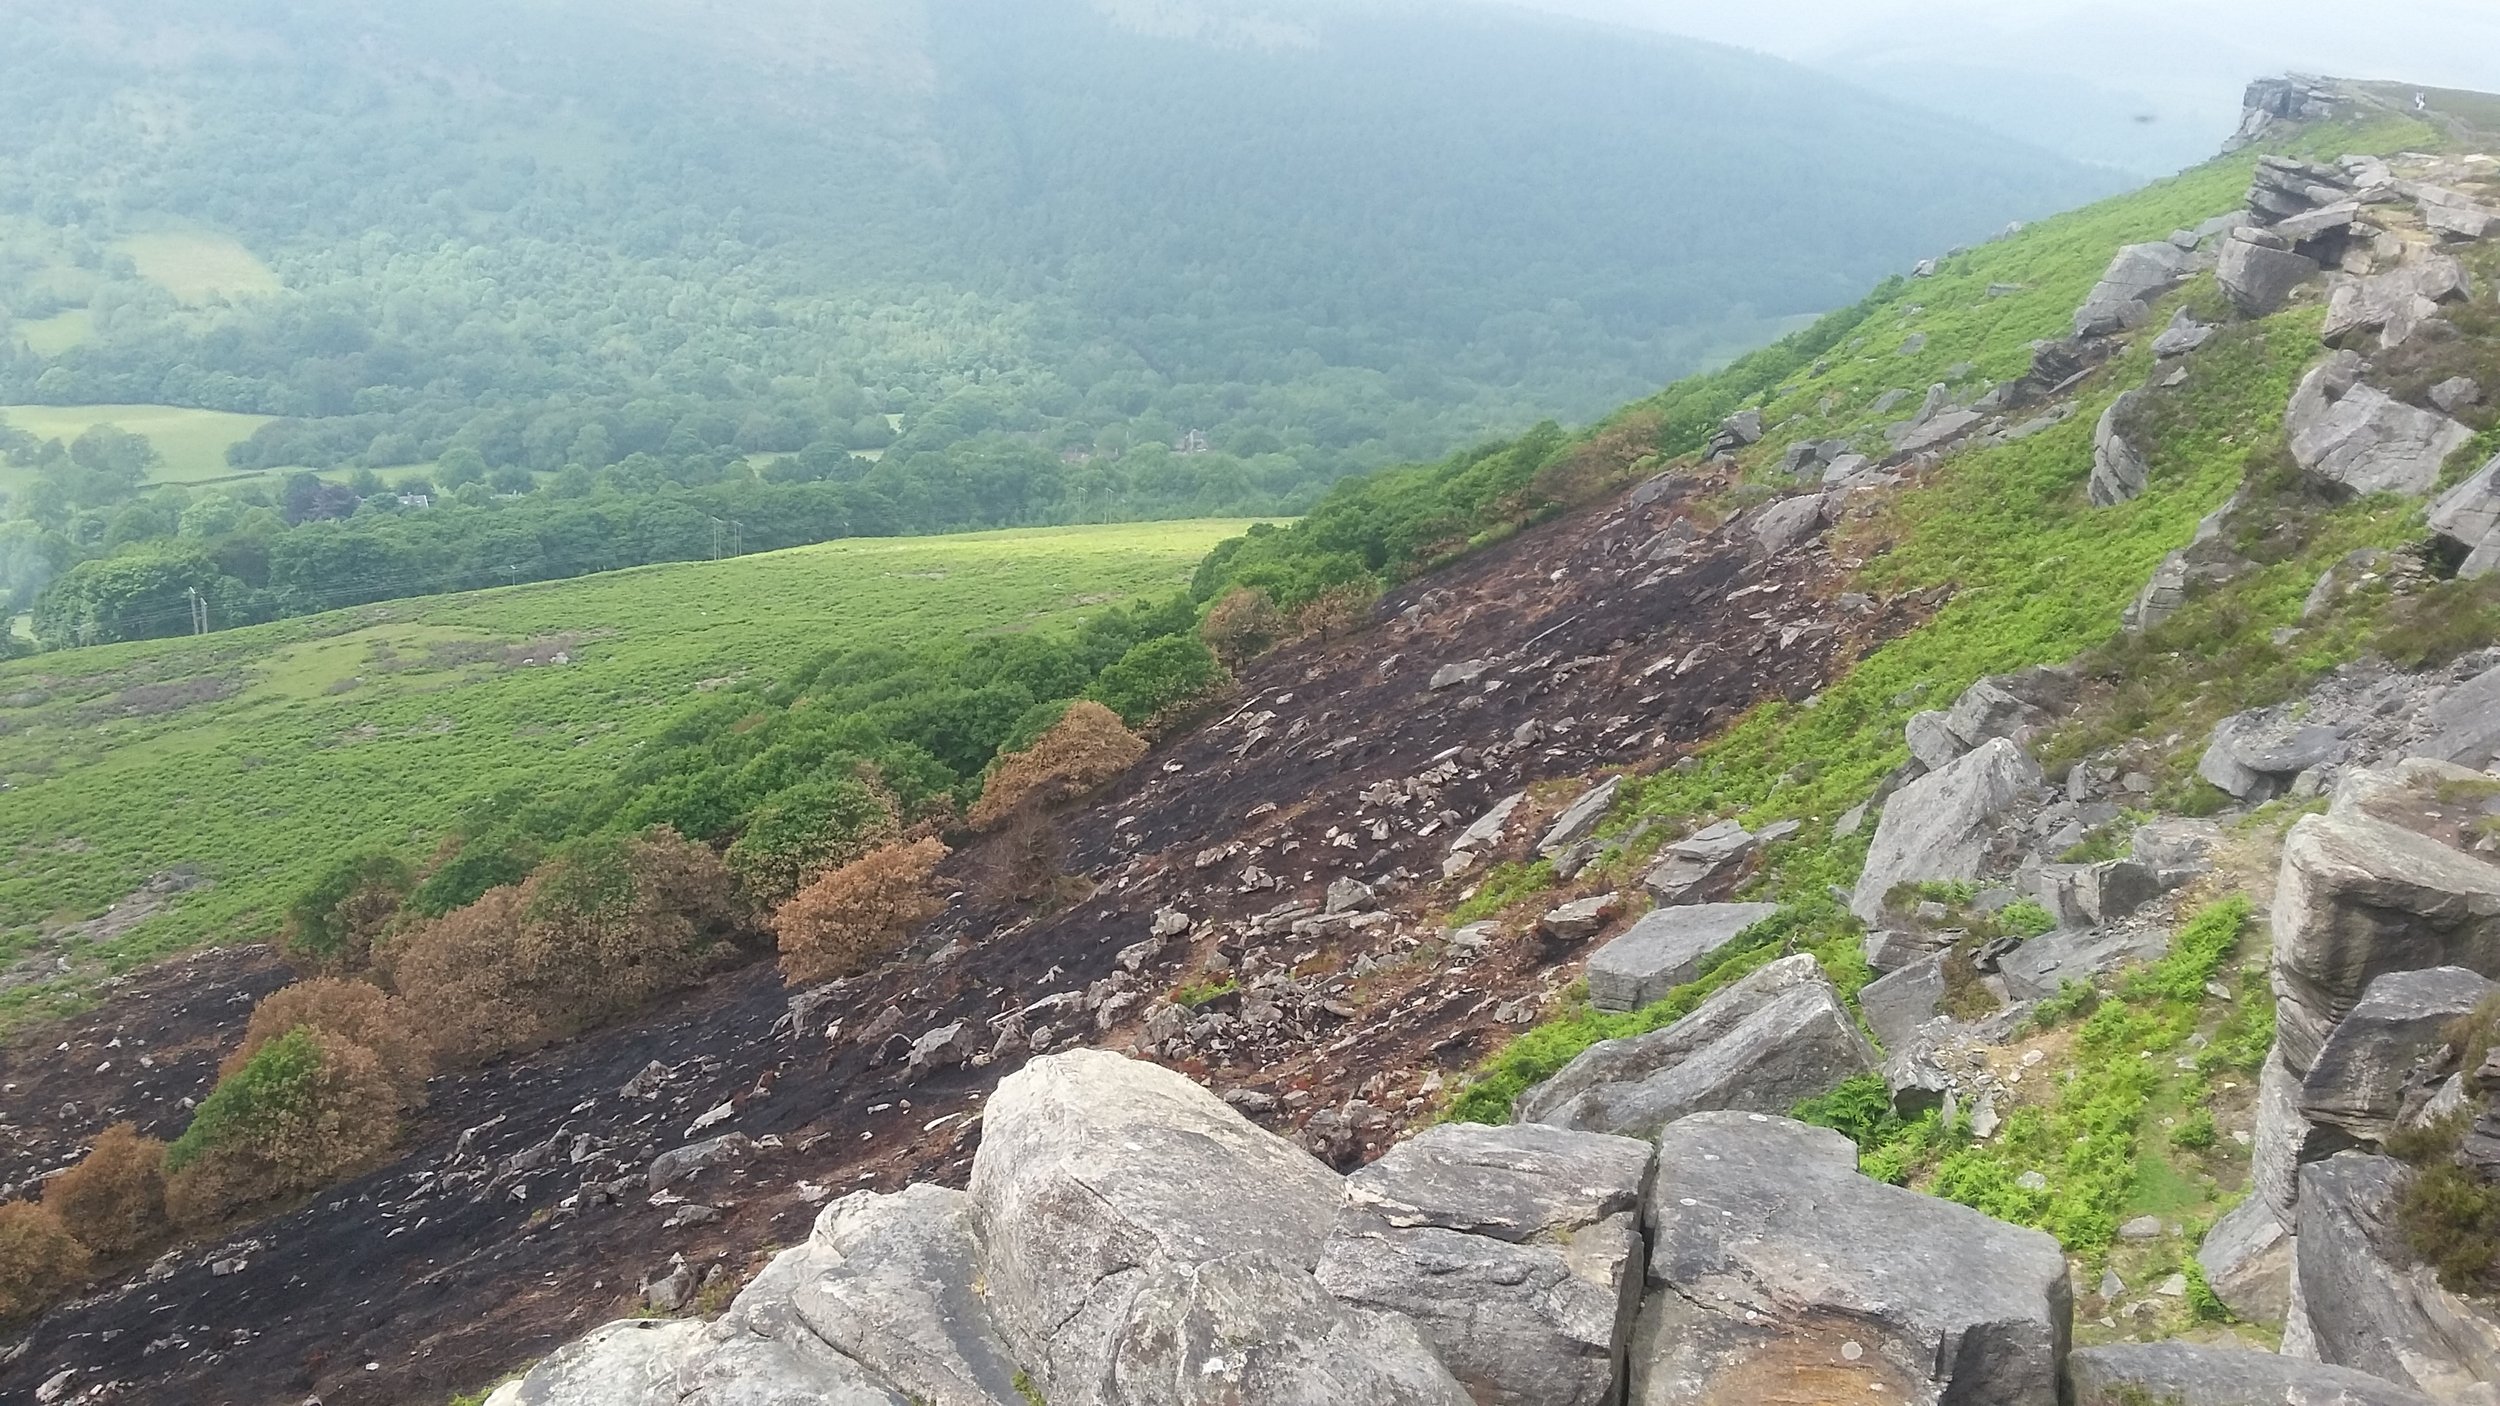  Aftermath of 2020 wildfire under the main escarpment at Bamford Edge 